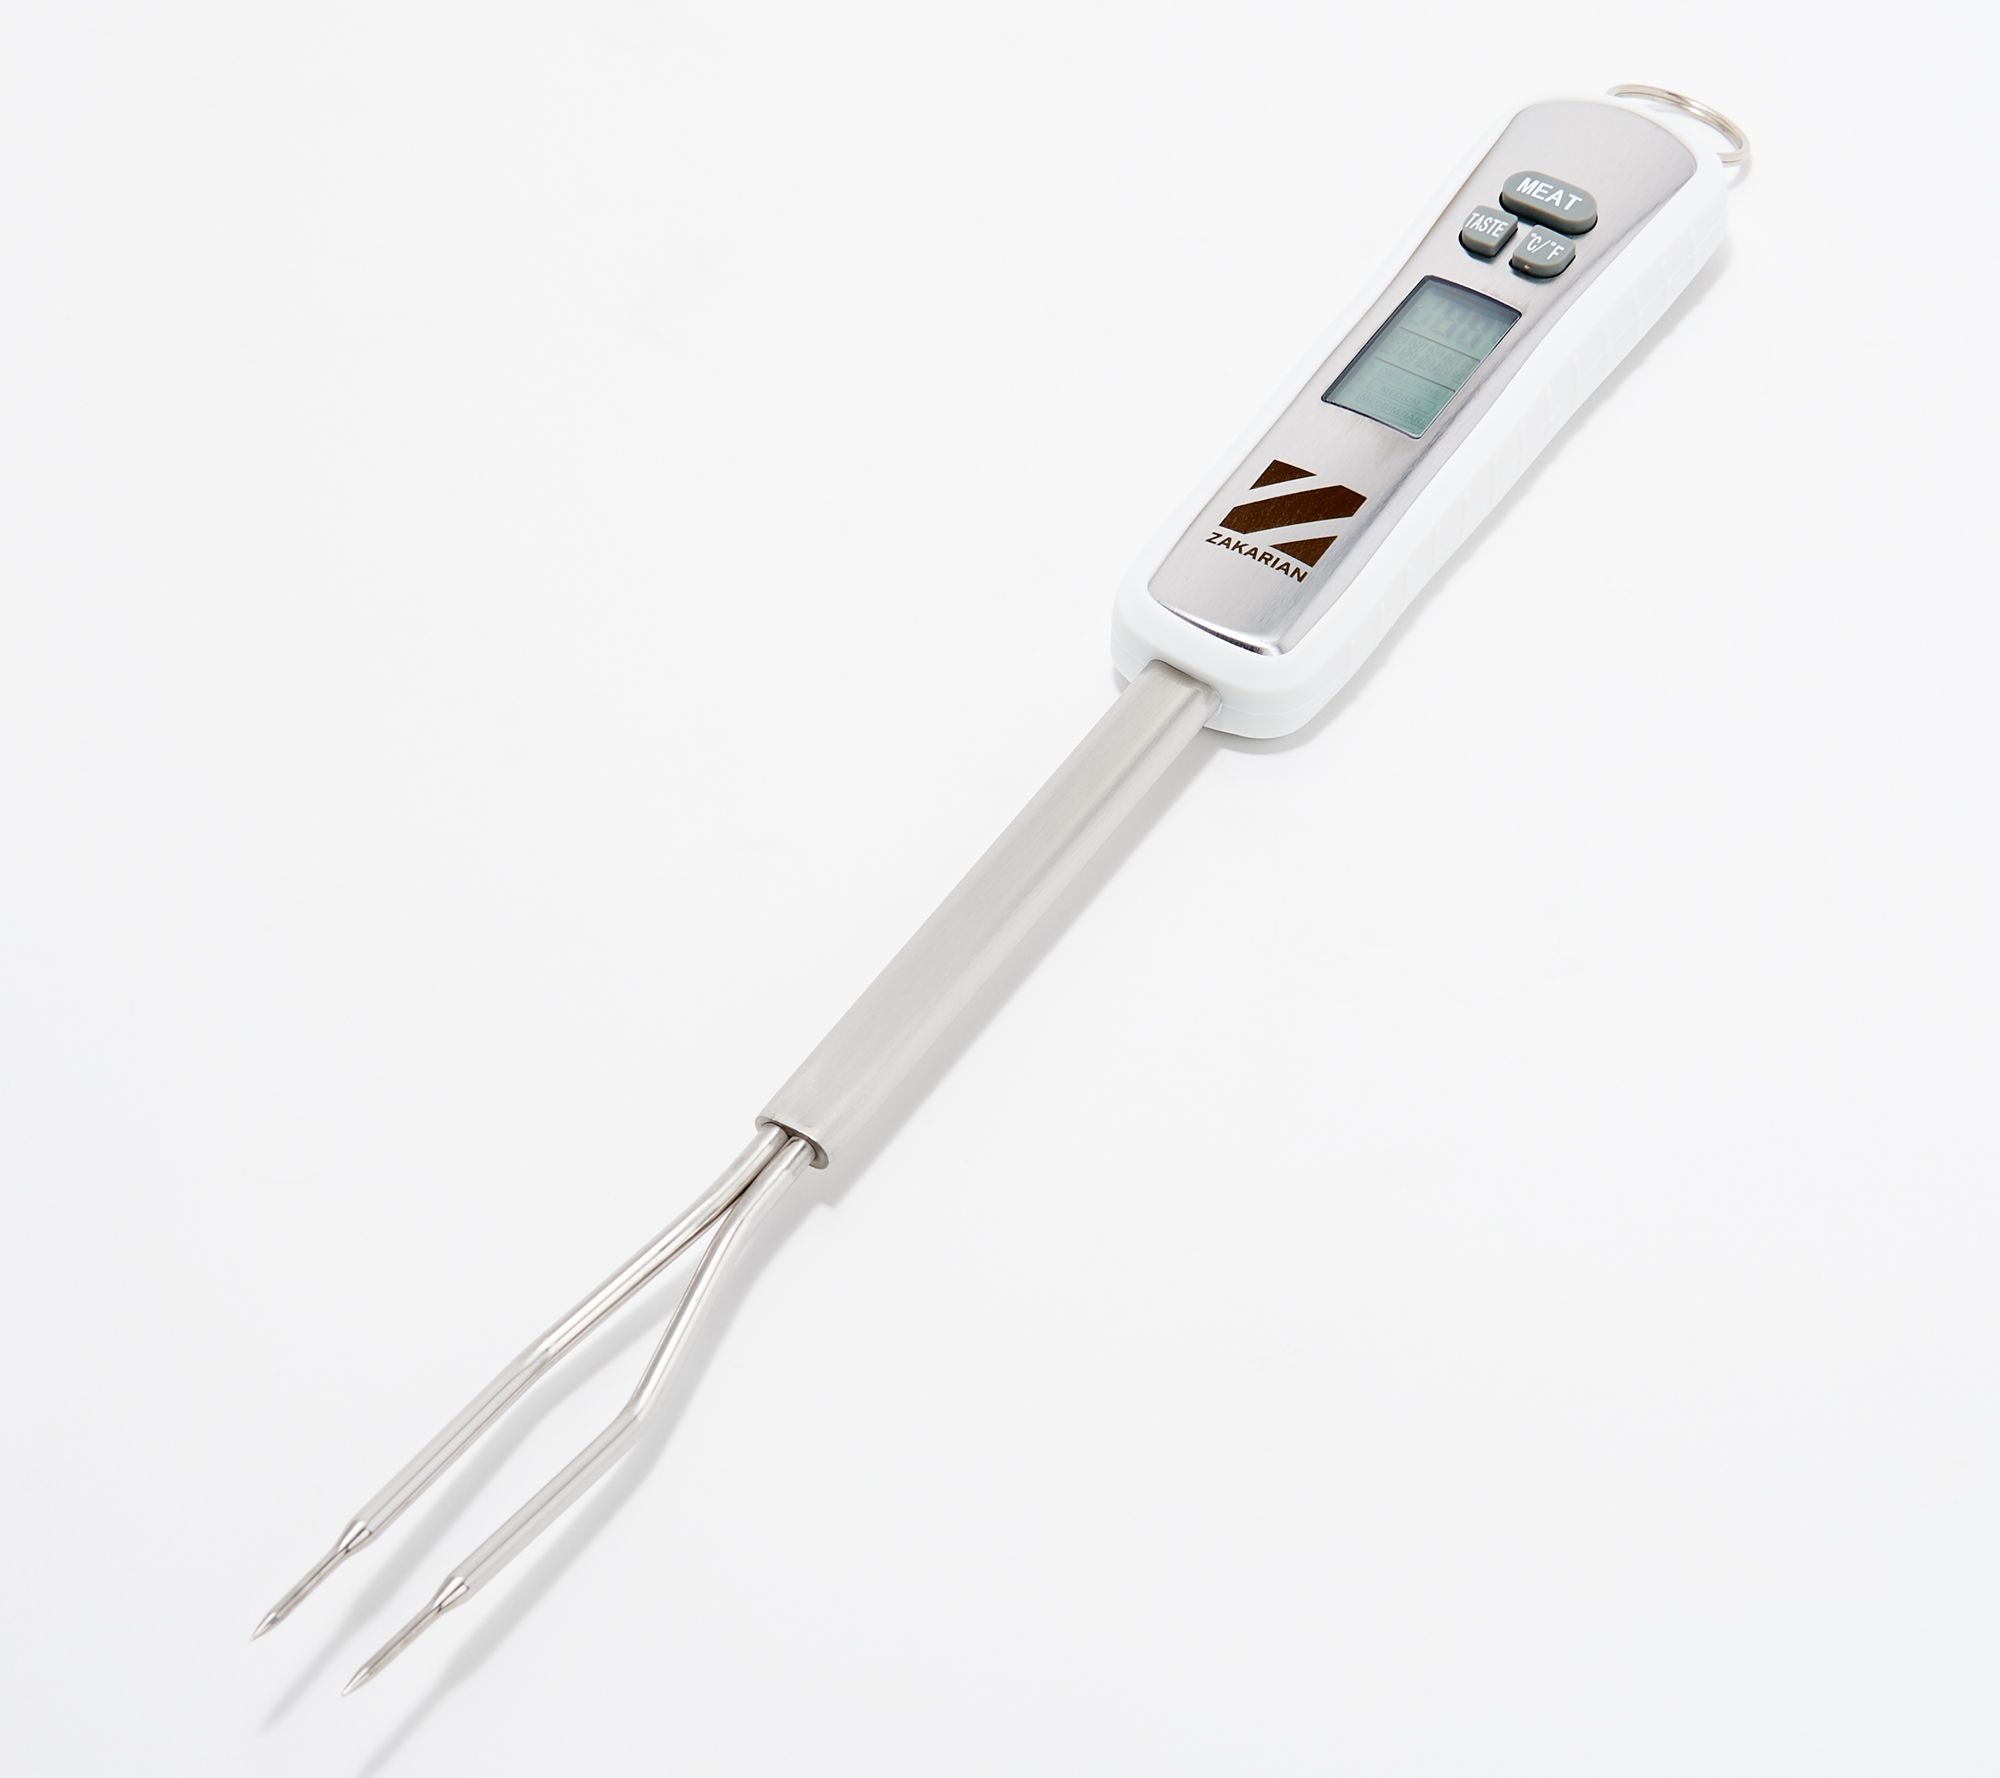 Digital BBQ Meat Thermometer Fork - Electronic Barbecue Meat